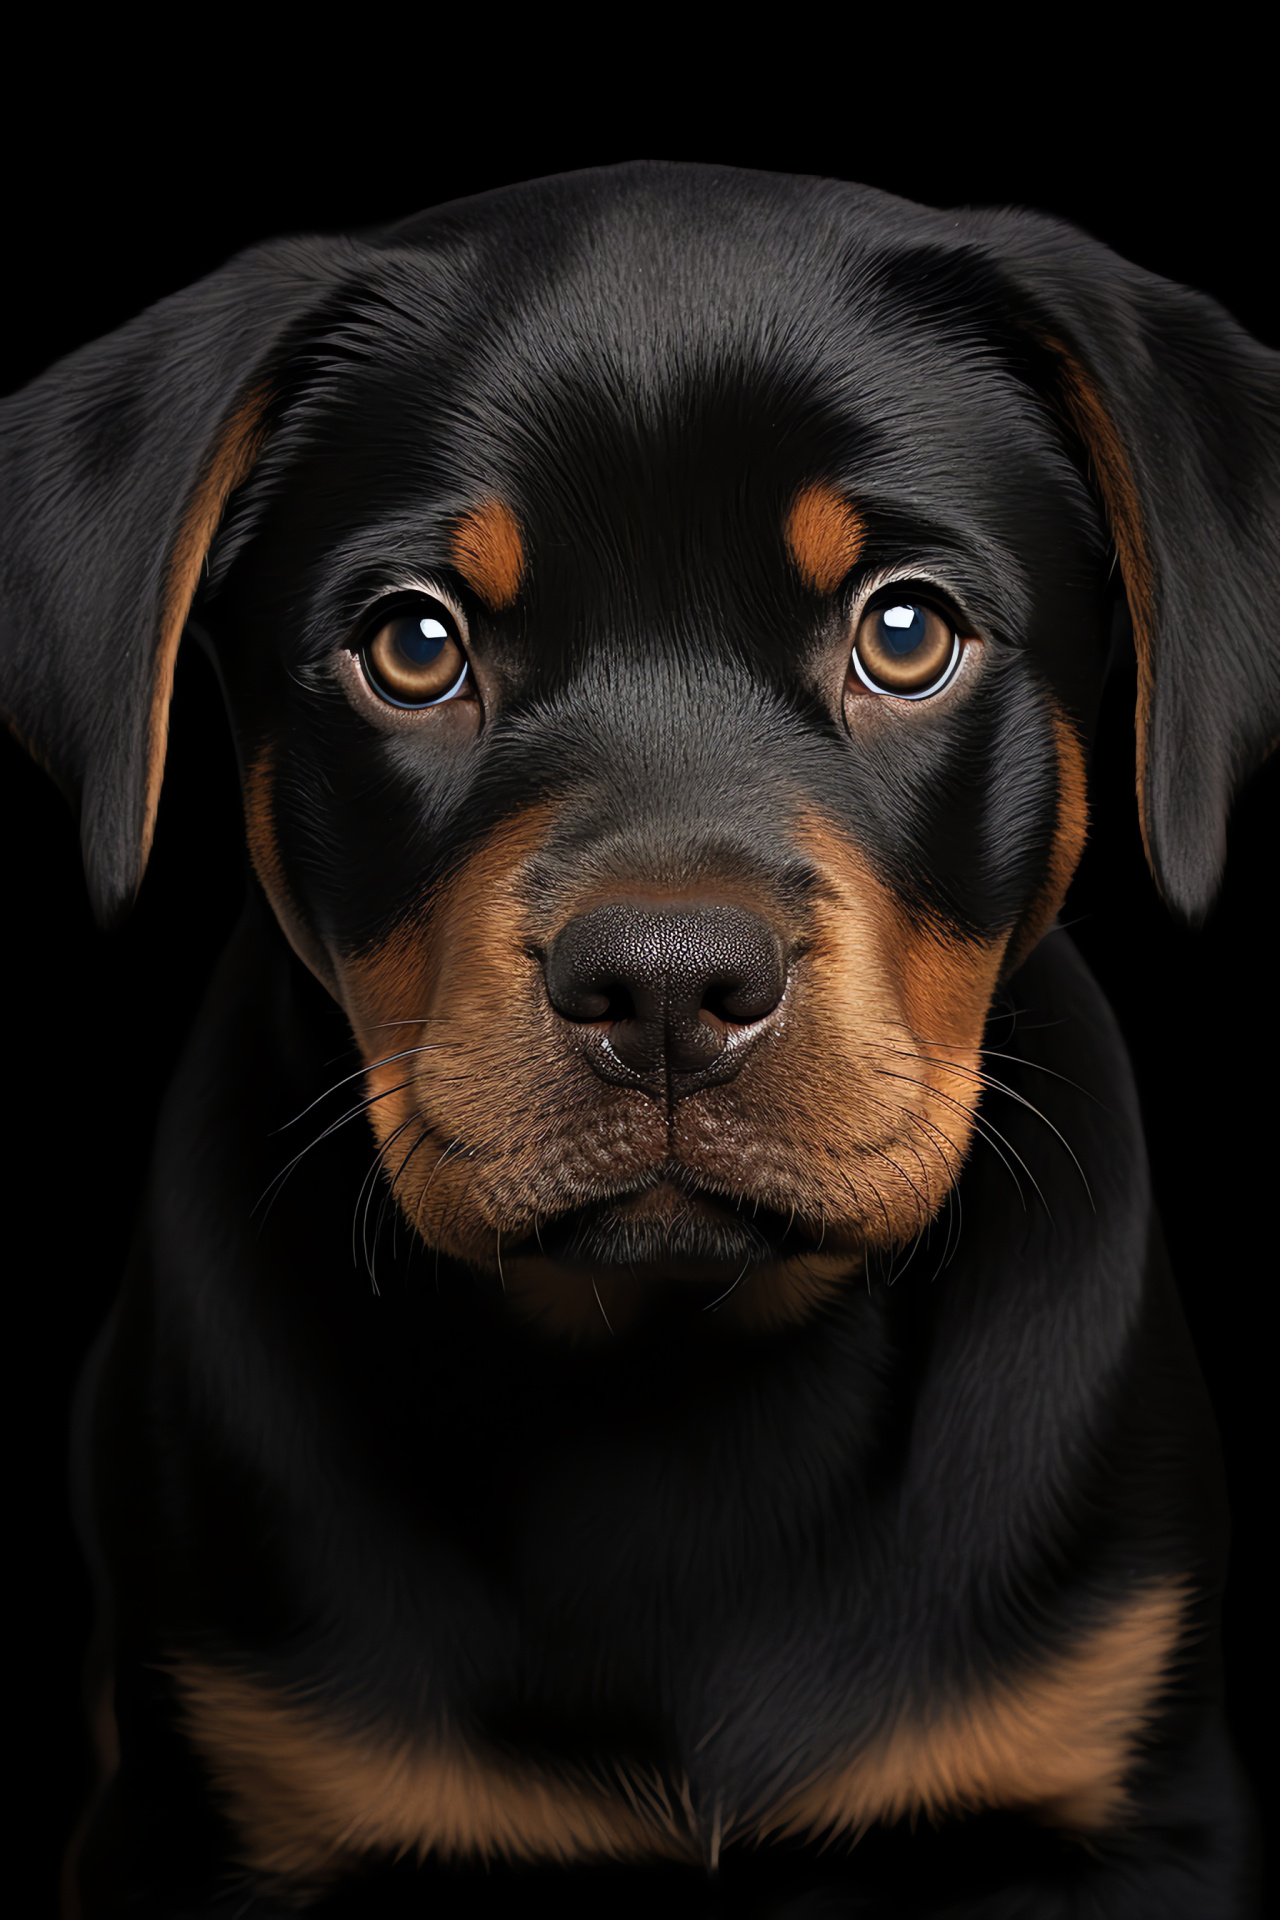 Rottweiler puppies, canine brown eyes, sleek canine fur, close-up puppy features, pure black backdrop, HD Phone Image